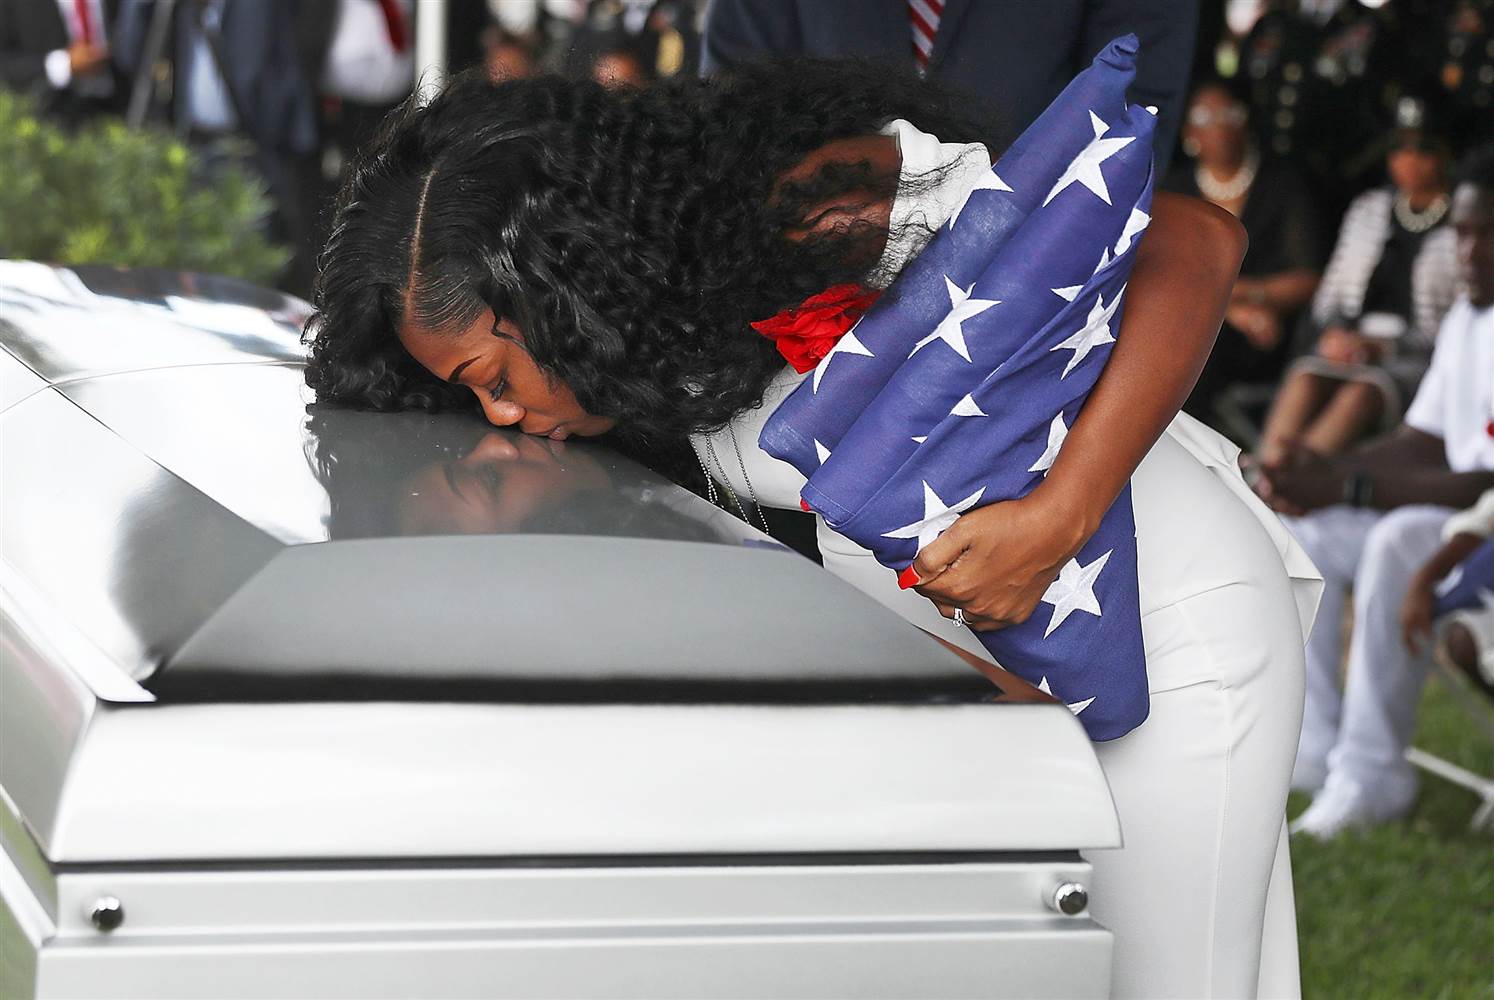 Sargent La David Johnsons Remains Found In Niger Weeks After His Funeral & His Wife Thought His Body Was In Casket